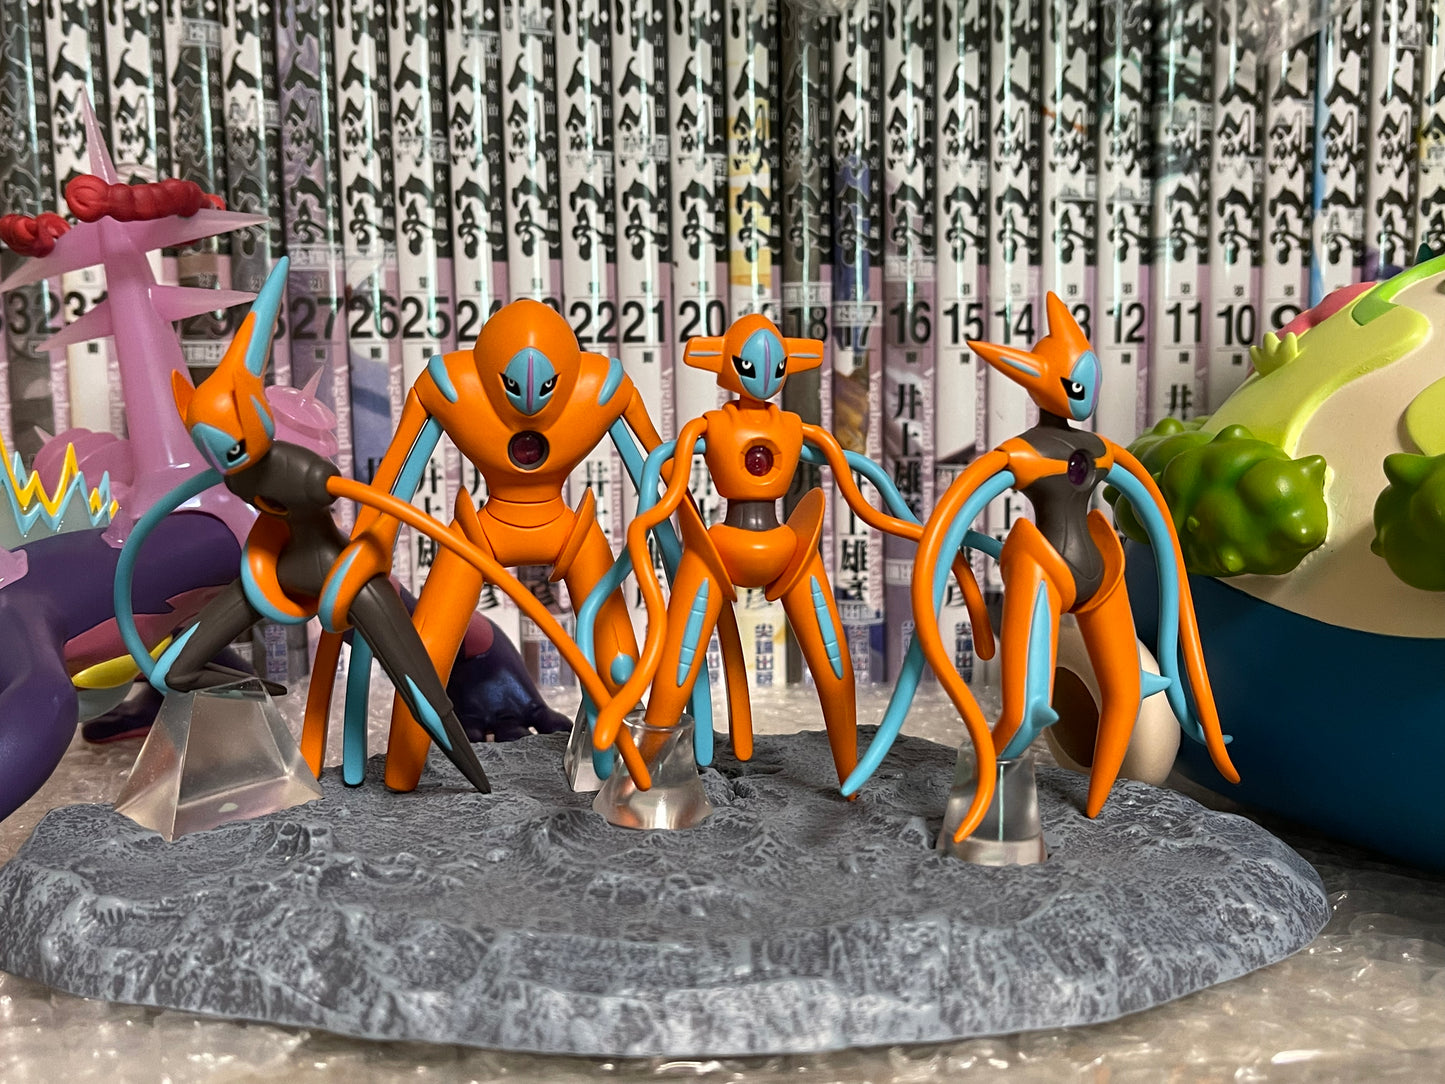 [IN STOCK] 1/20 Scale World Figure [DXS Studio] - Deoxys (4 formes)